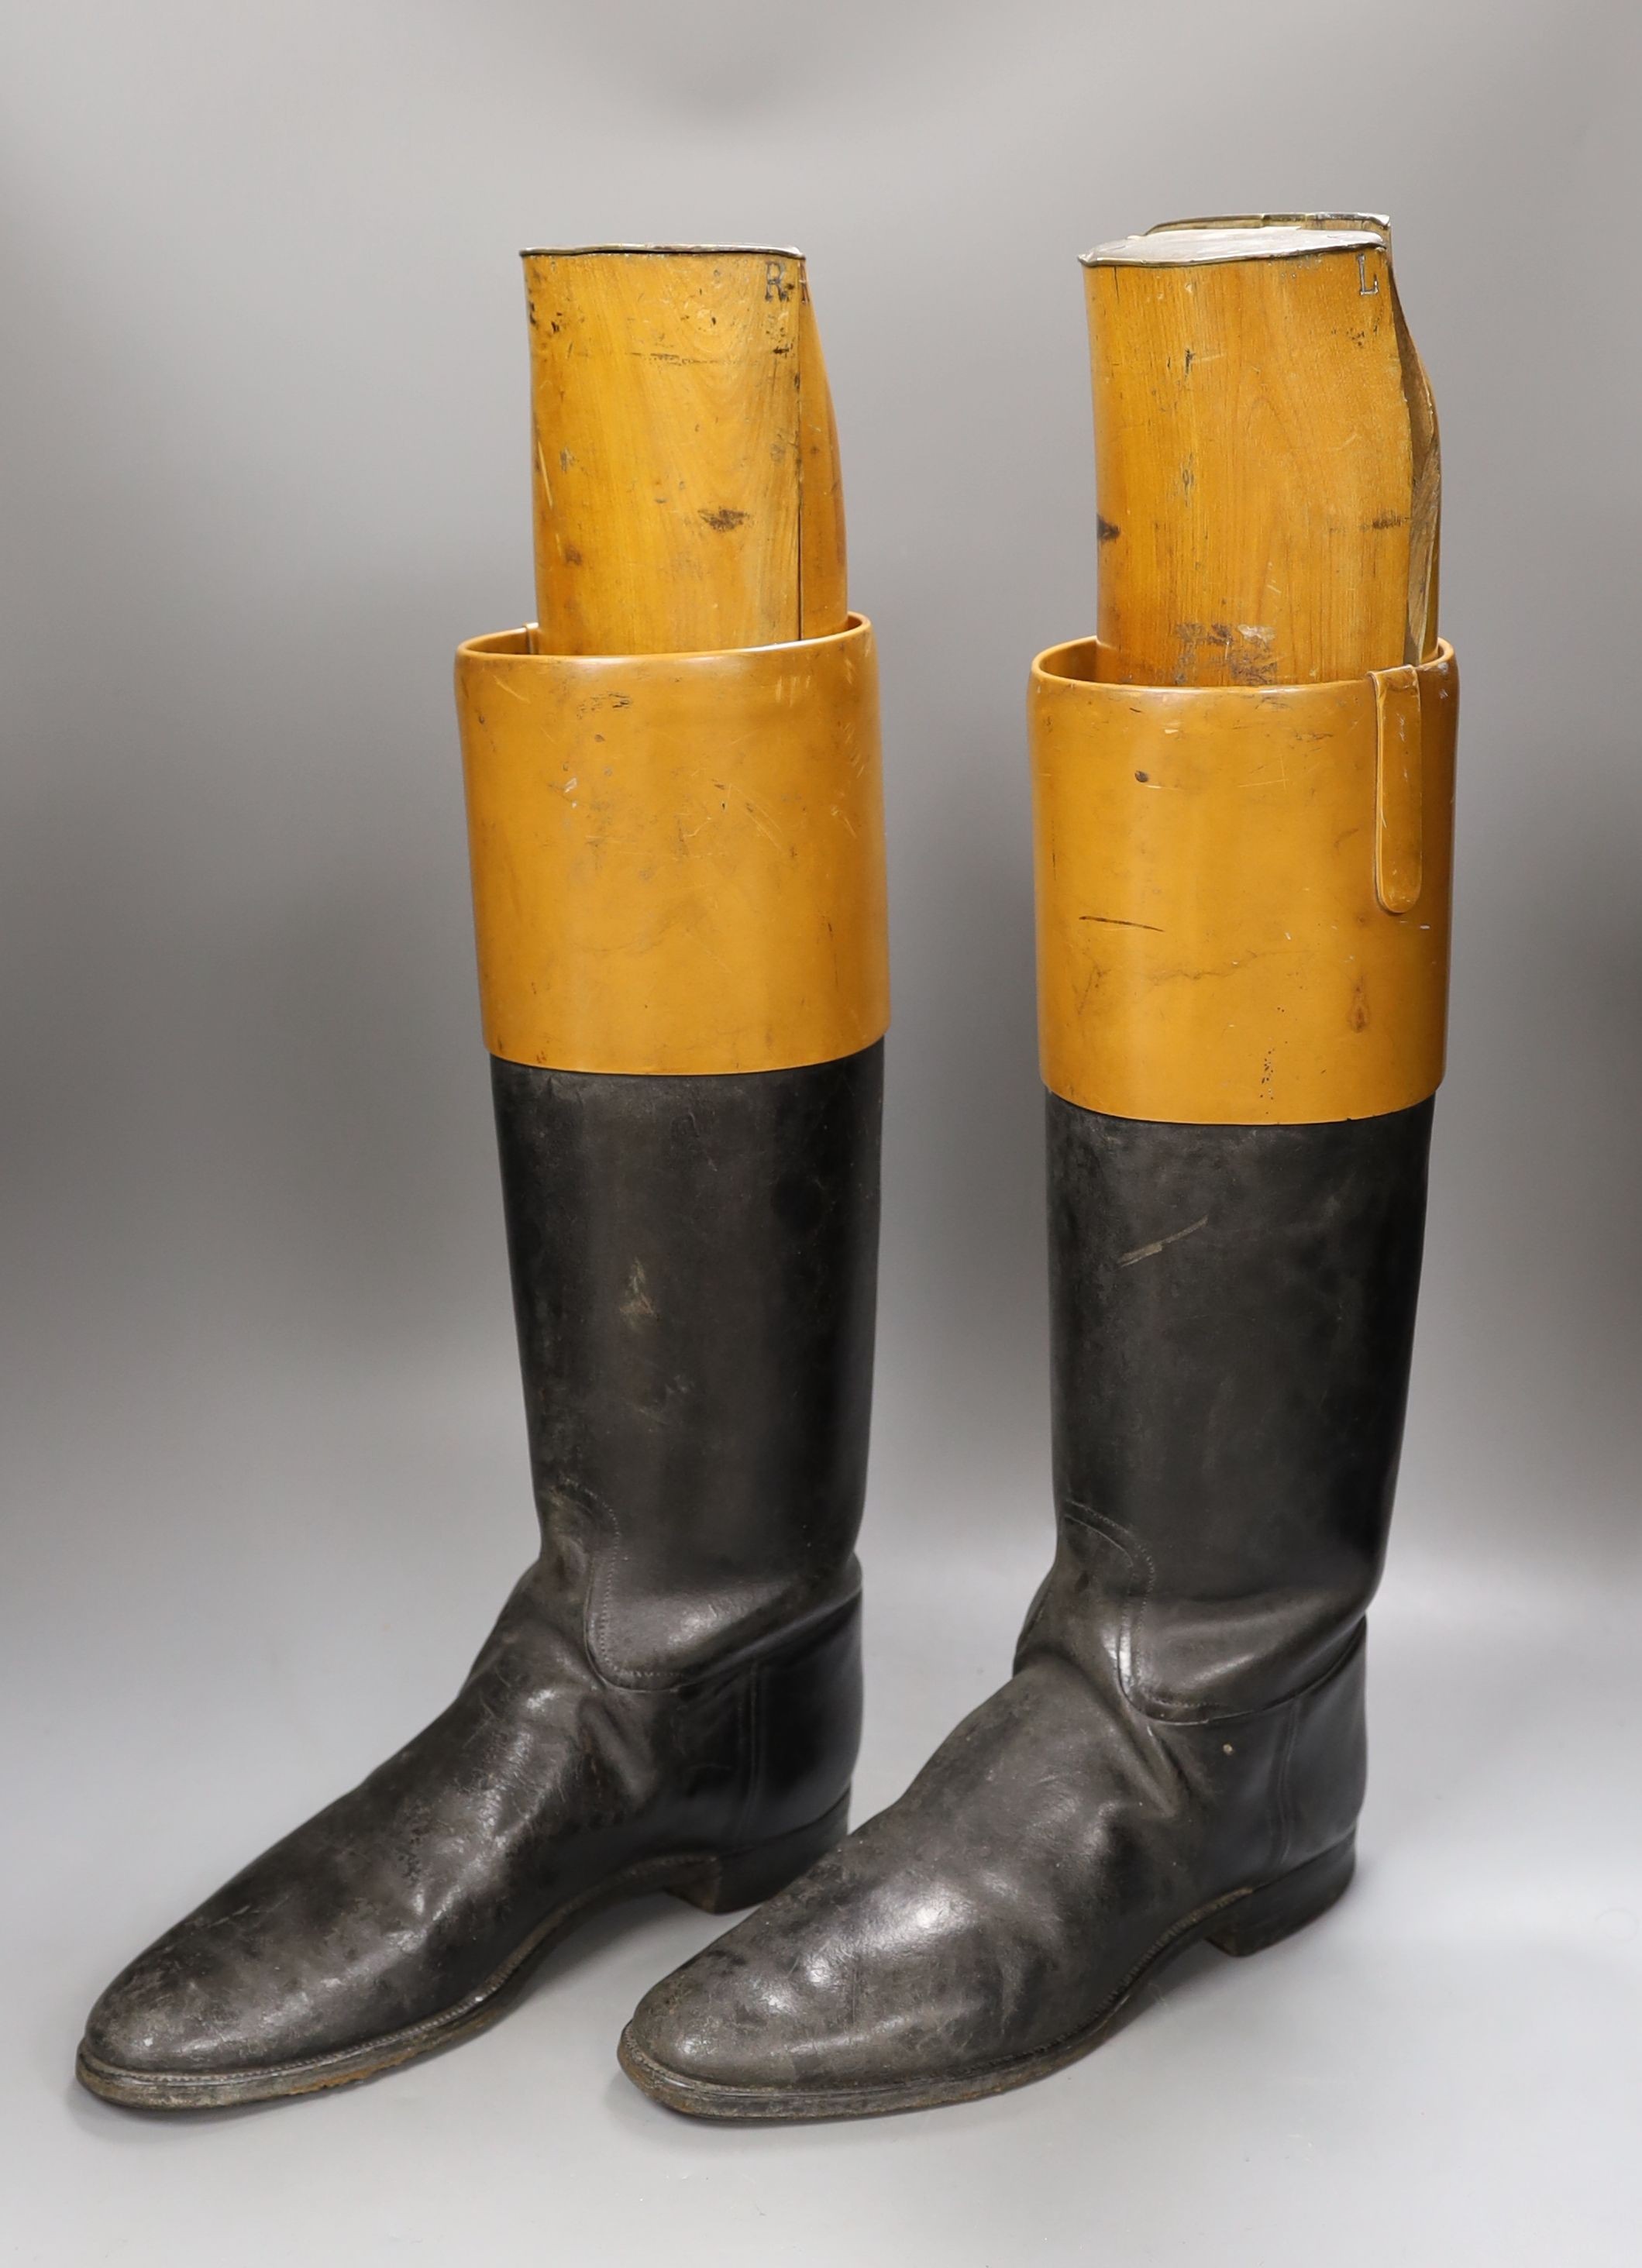 A pair of vintage leather riding boots with beech wood boot trees by Seadon Bros, St. James’s, mounted with engraved brass plates. height of trees 52 cms. *This lot is being sold in aid of the charity Prostate Cancer UK